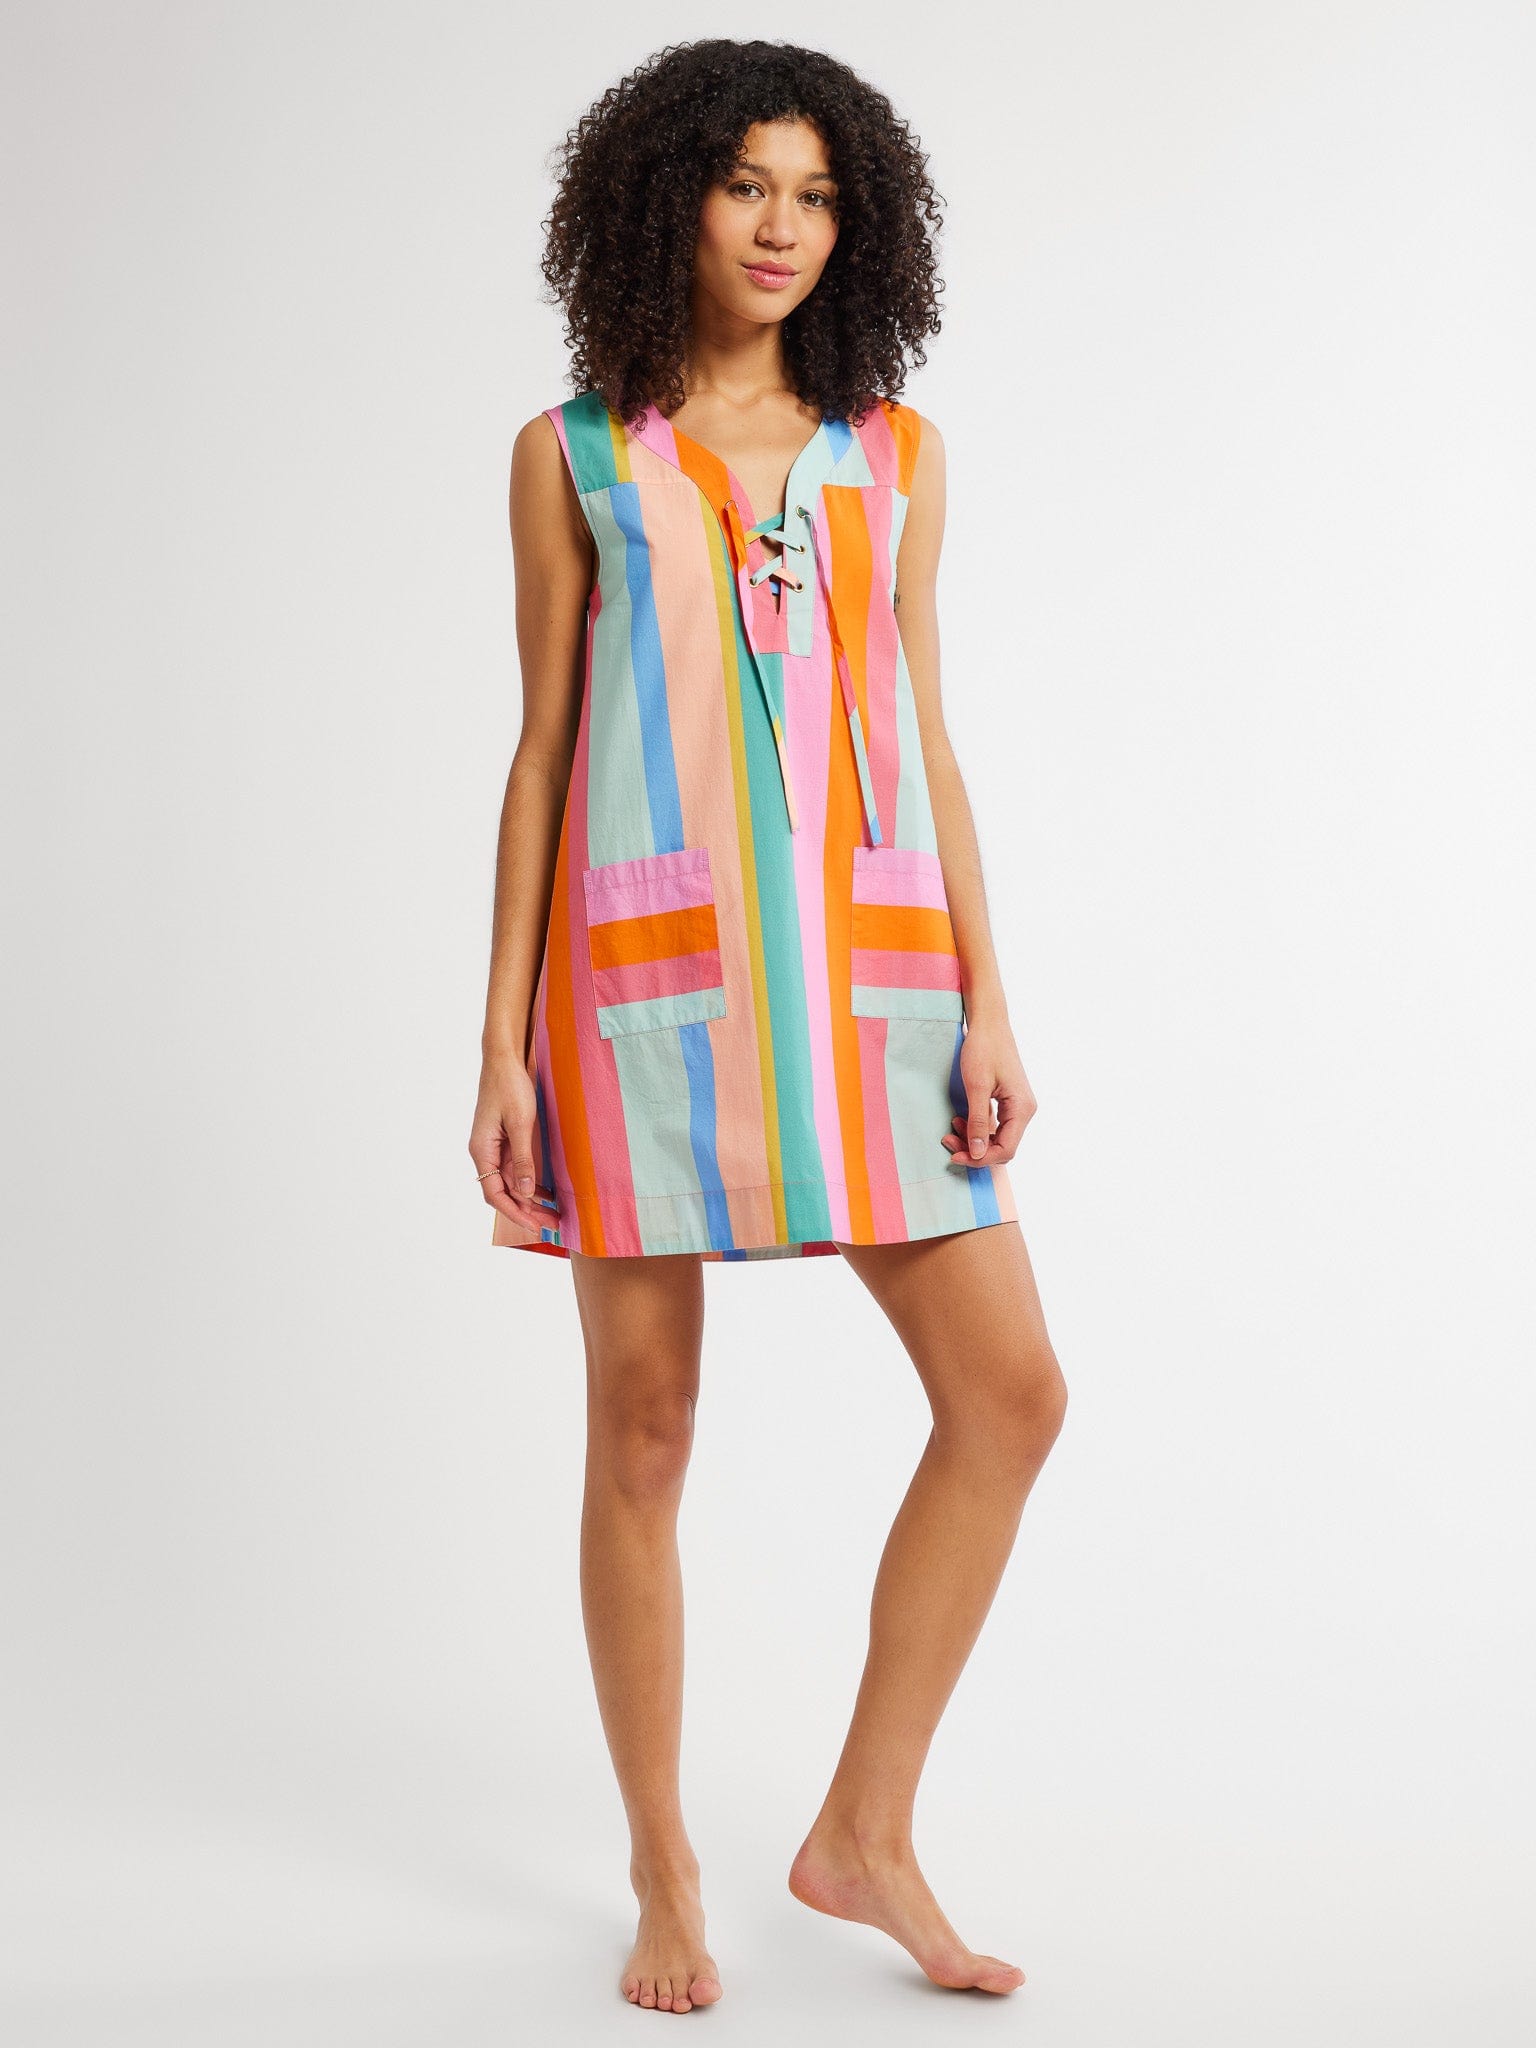 MILLE Clothing Penny Dress in Confetti Stripe